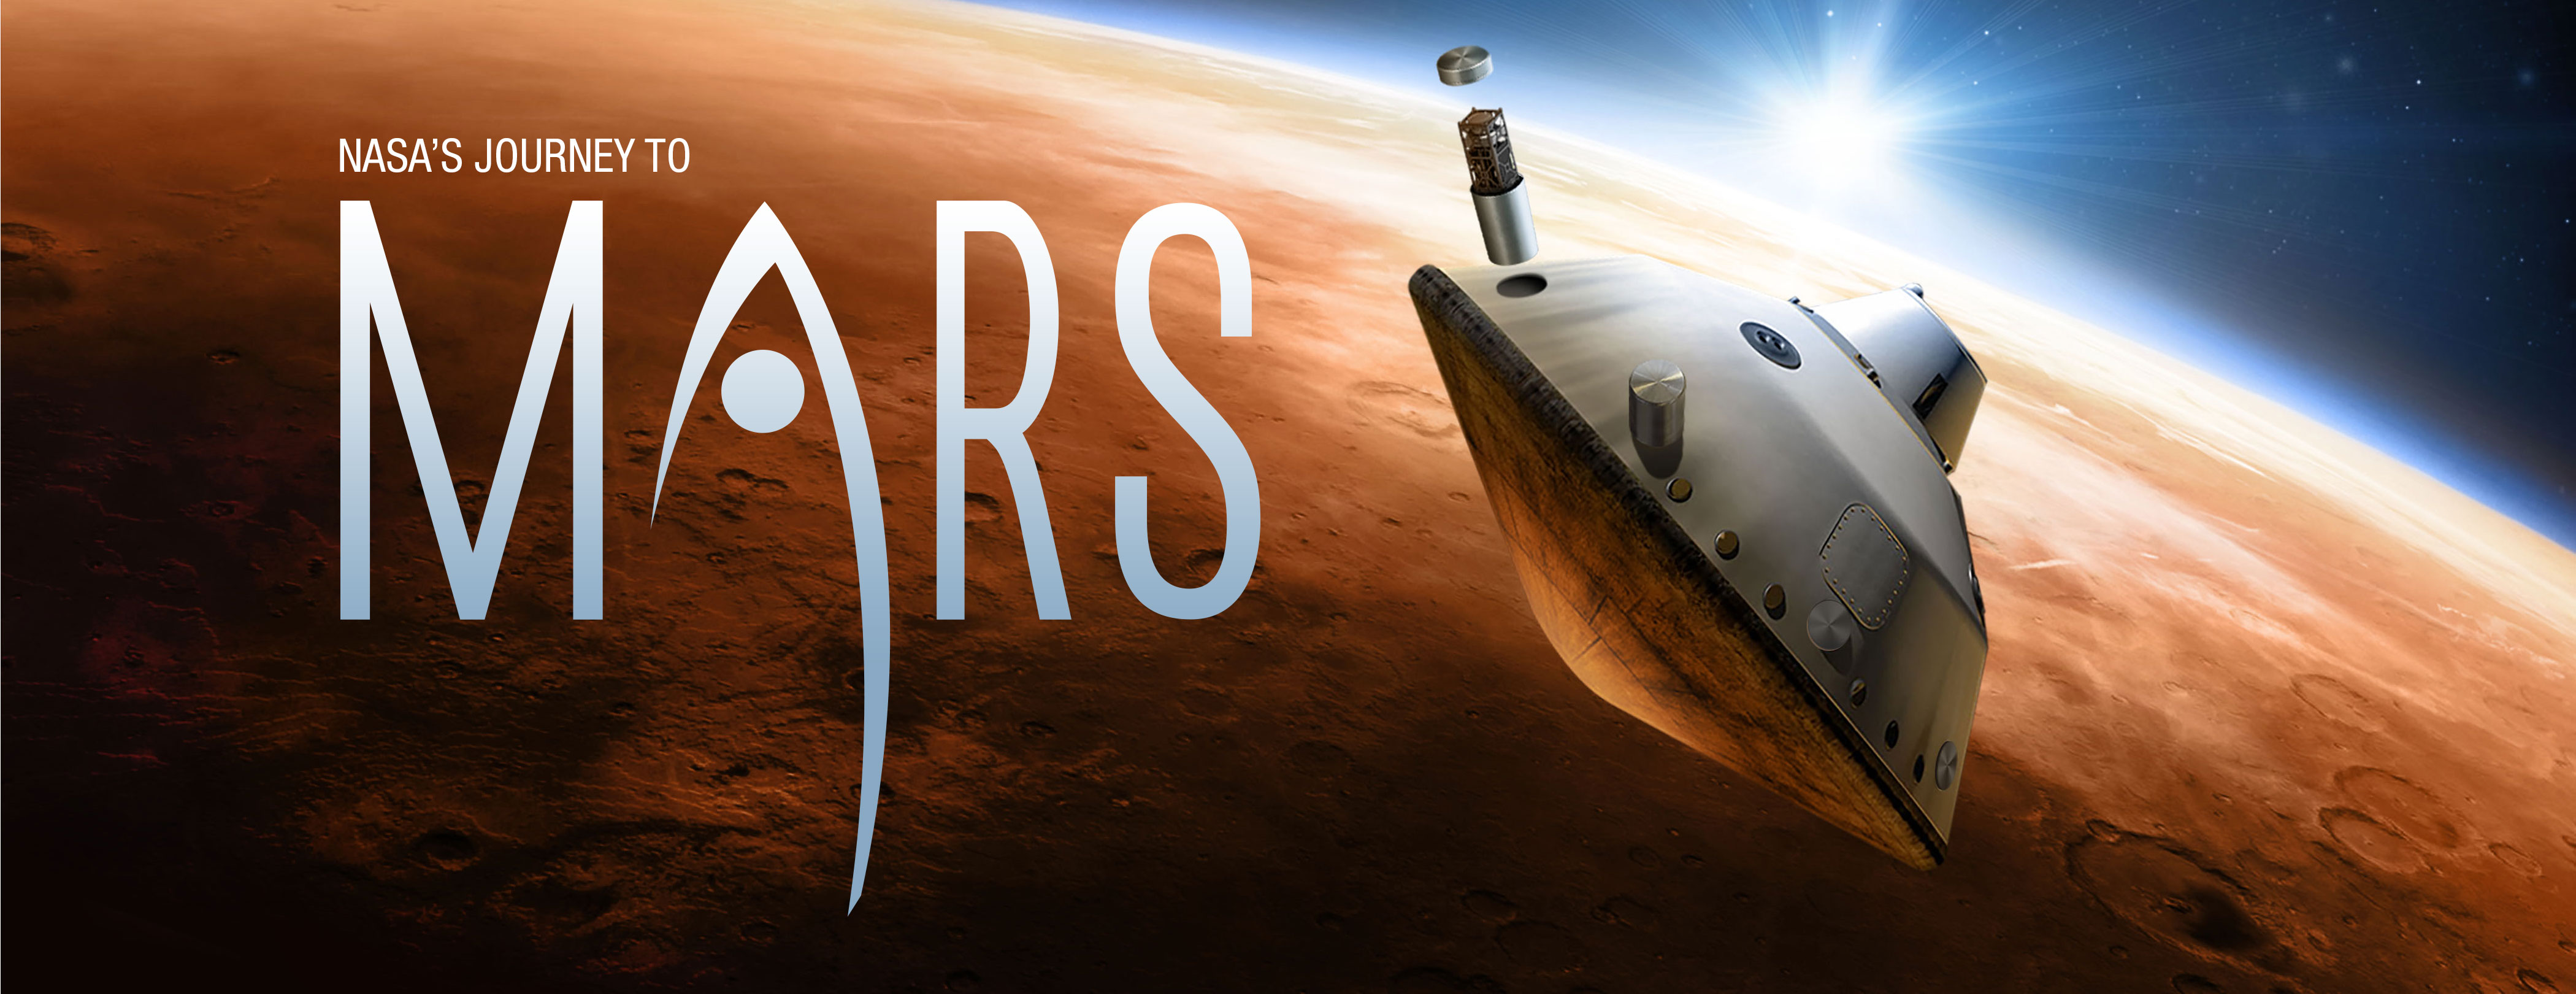 Journey of a Lifetime-Mars Education Resources | NASA